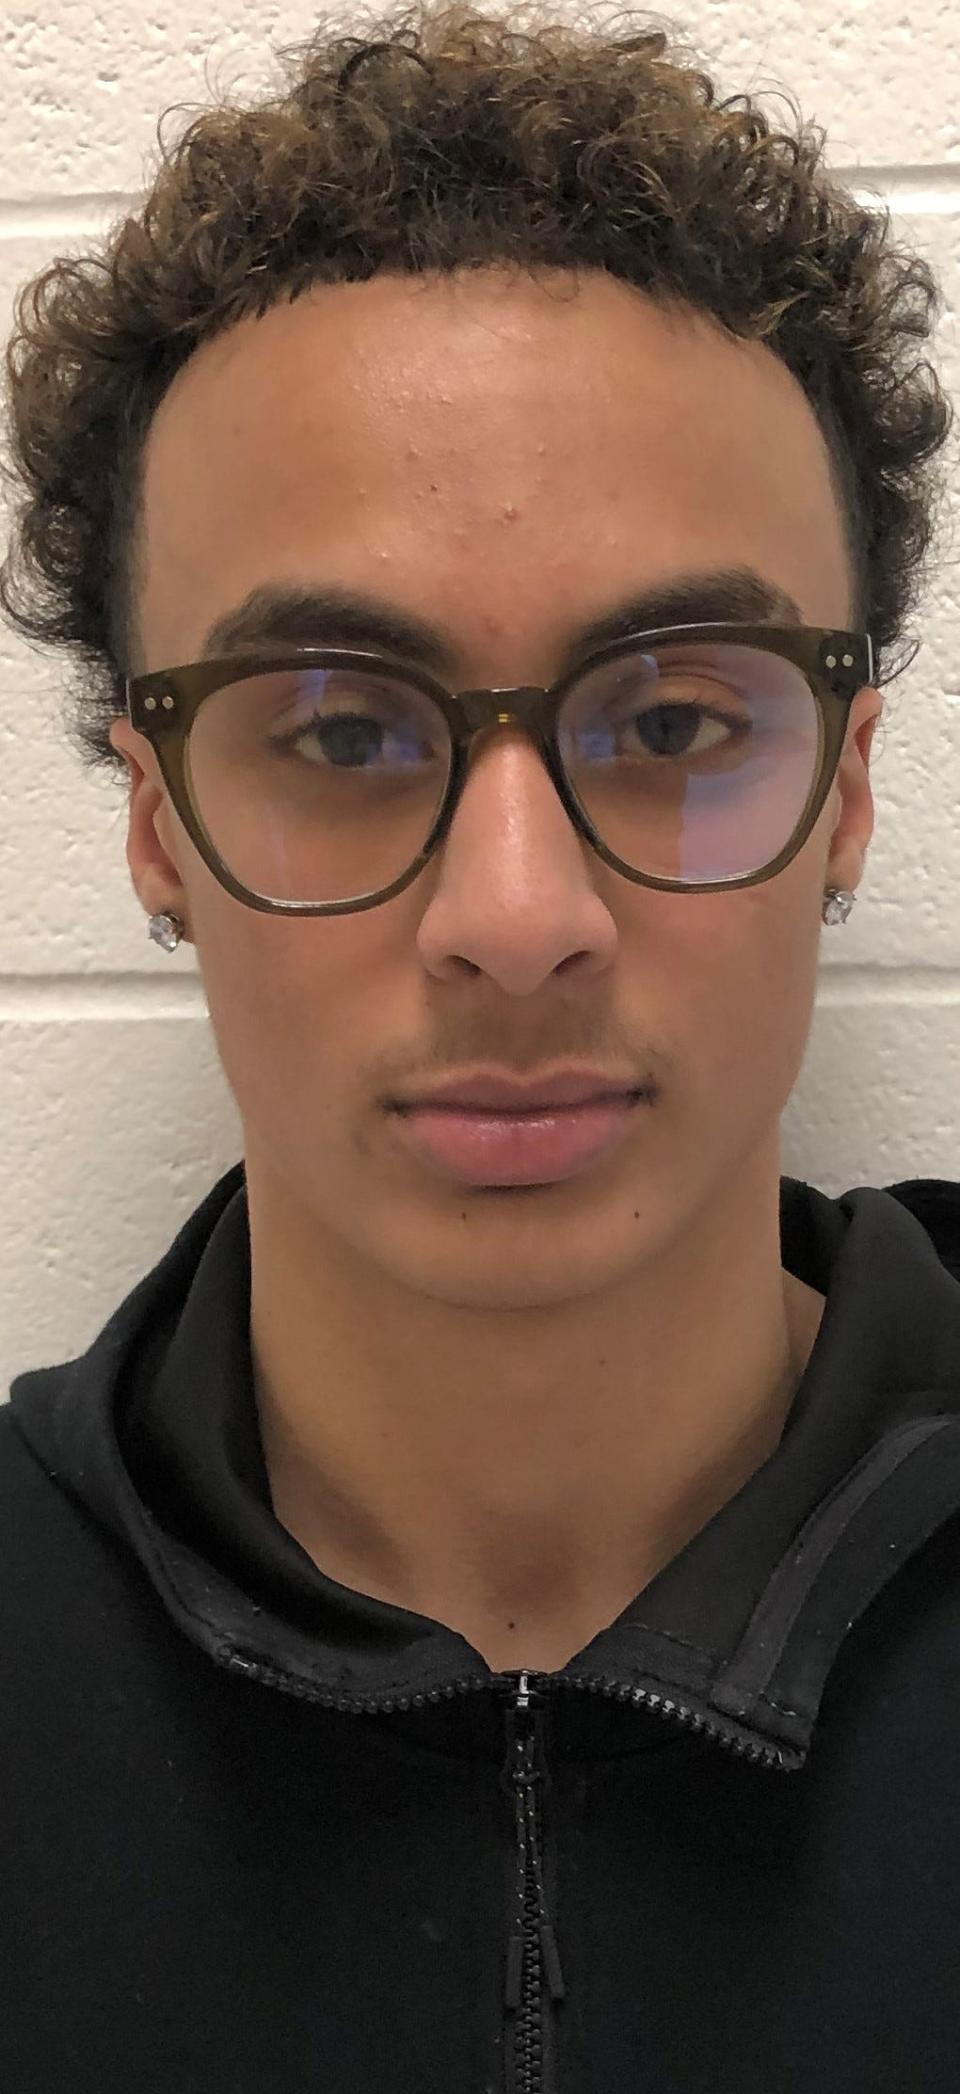 Zanesville junior Rashaud Hampton scored 10 of his 19 points in the third quarter Tuesday as the Blue Devils downed Heath 49-37 in Winland Memorial Gymnasium.